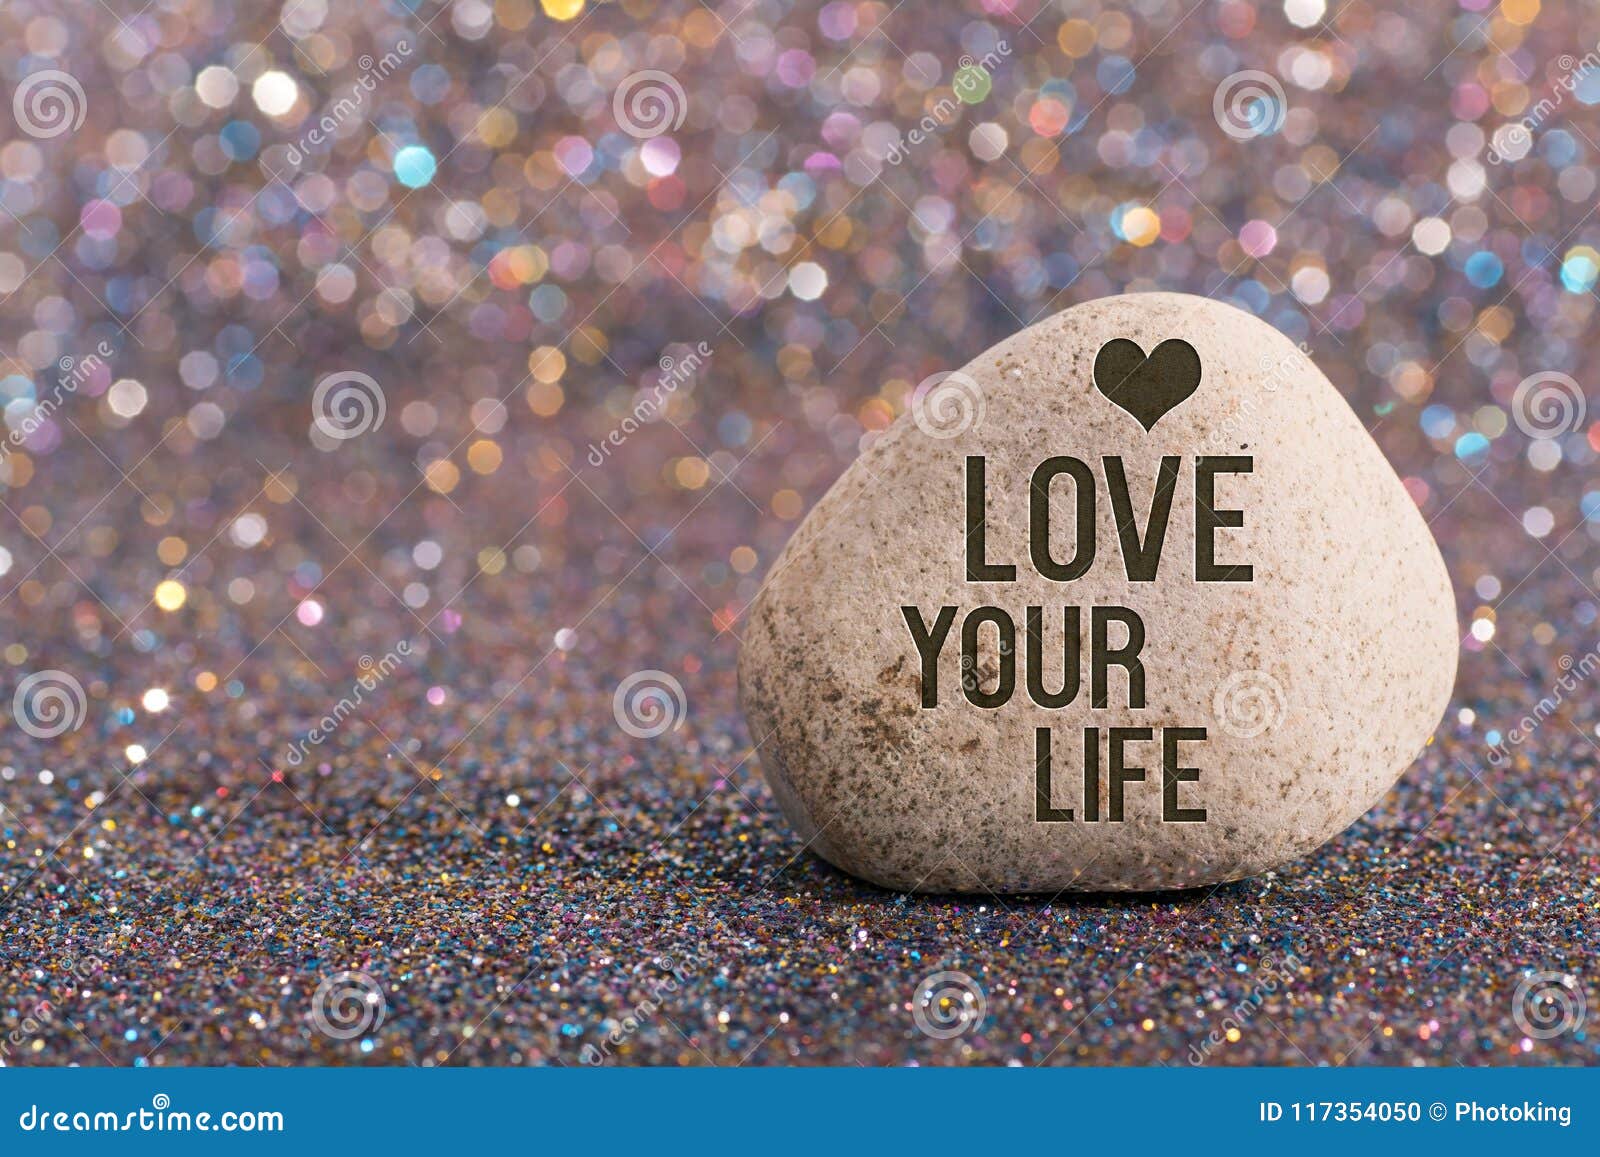 love your life on stone